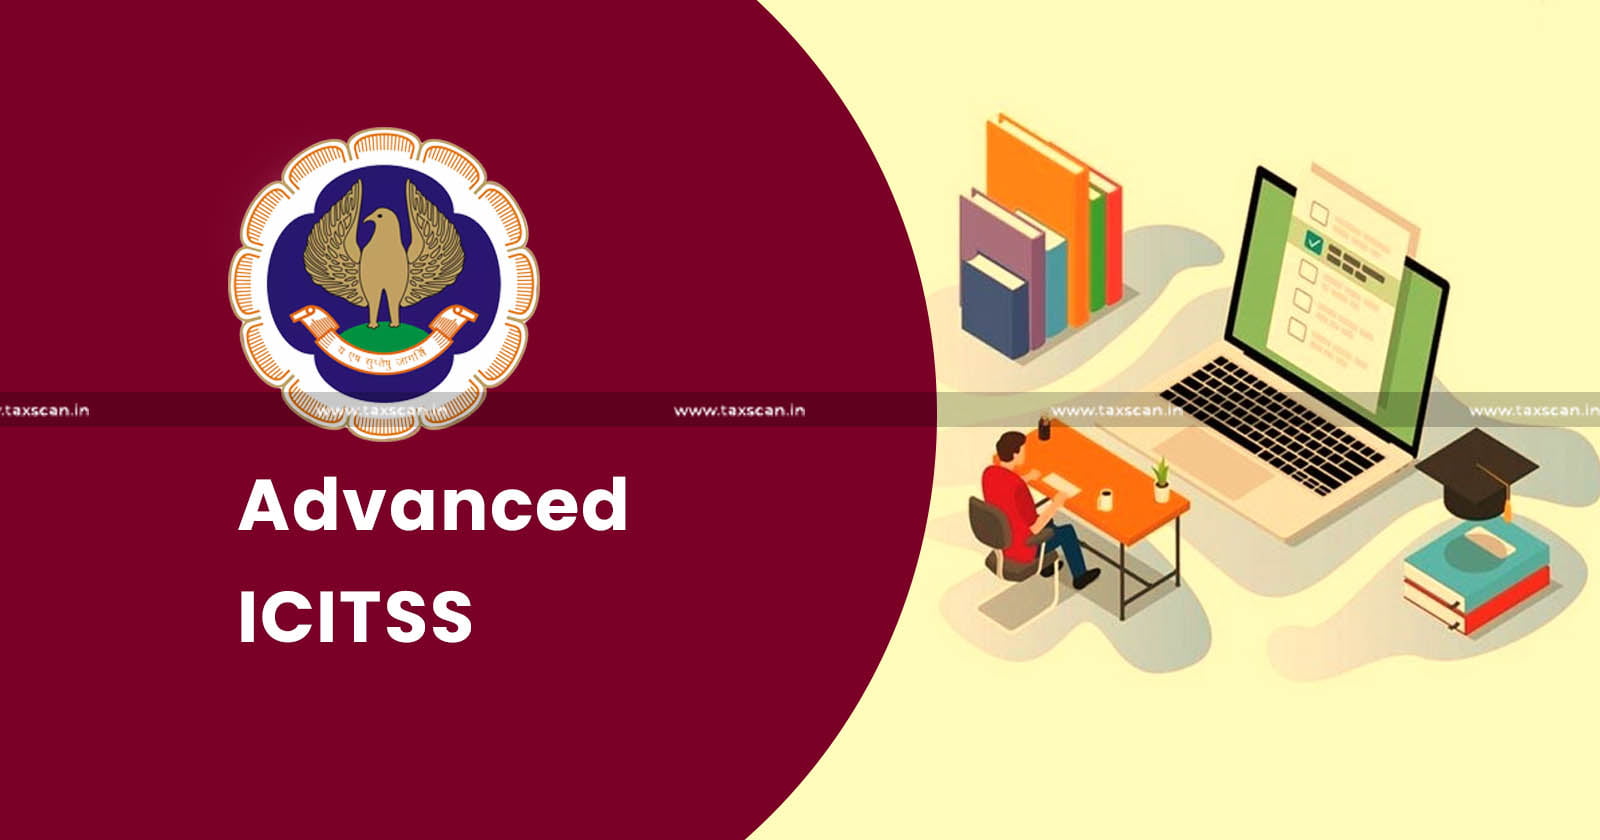 ICAI - chartered accountant - Advanced ICITSS - Computer Based Mode - taxscan